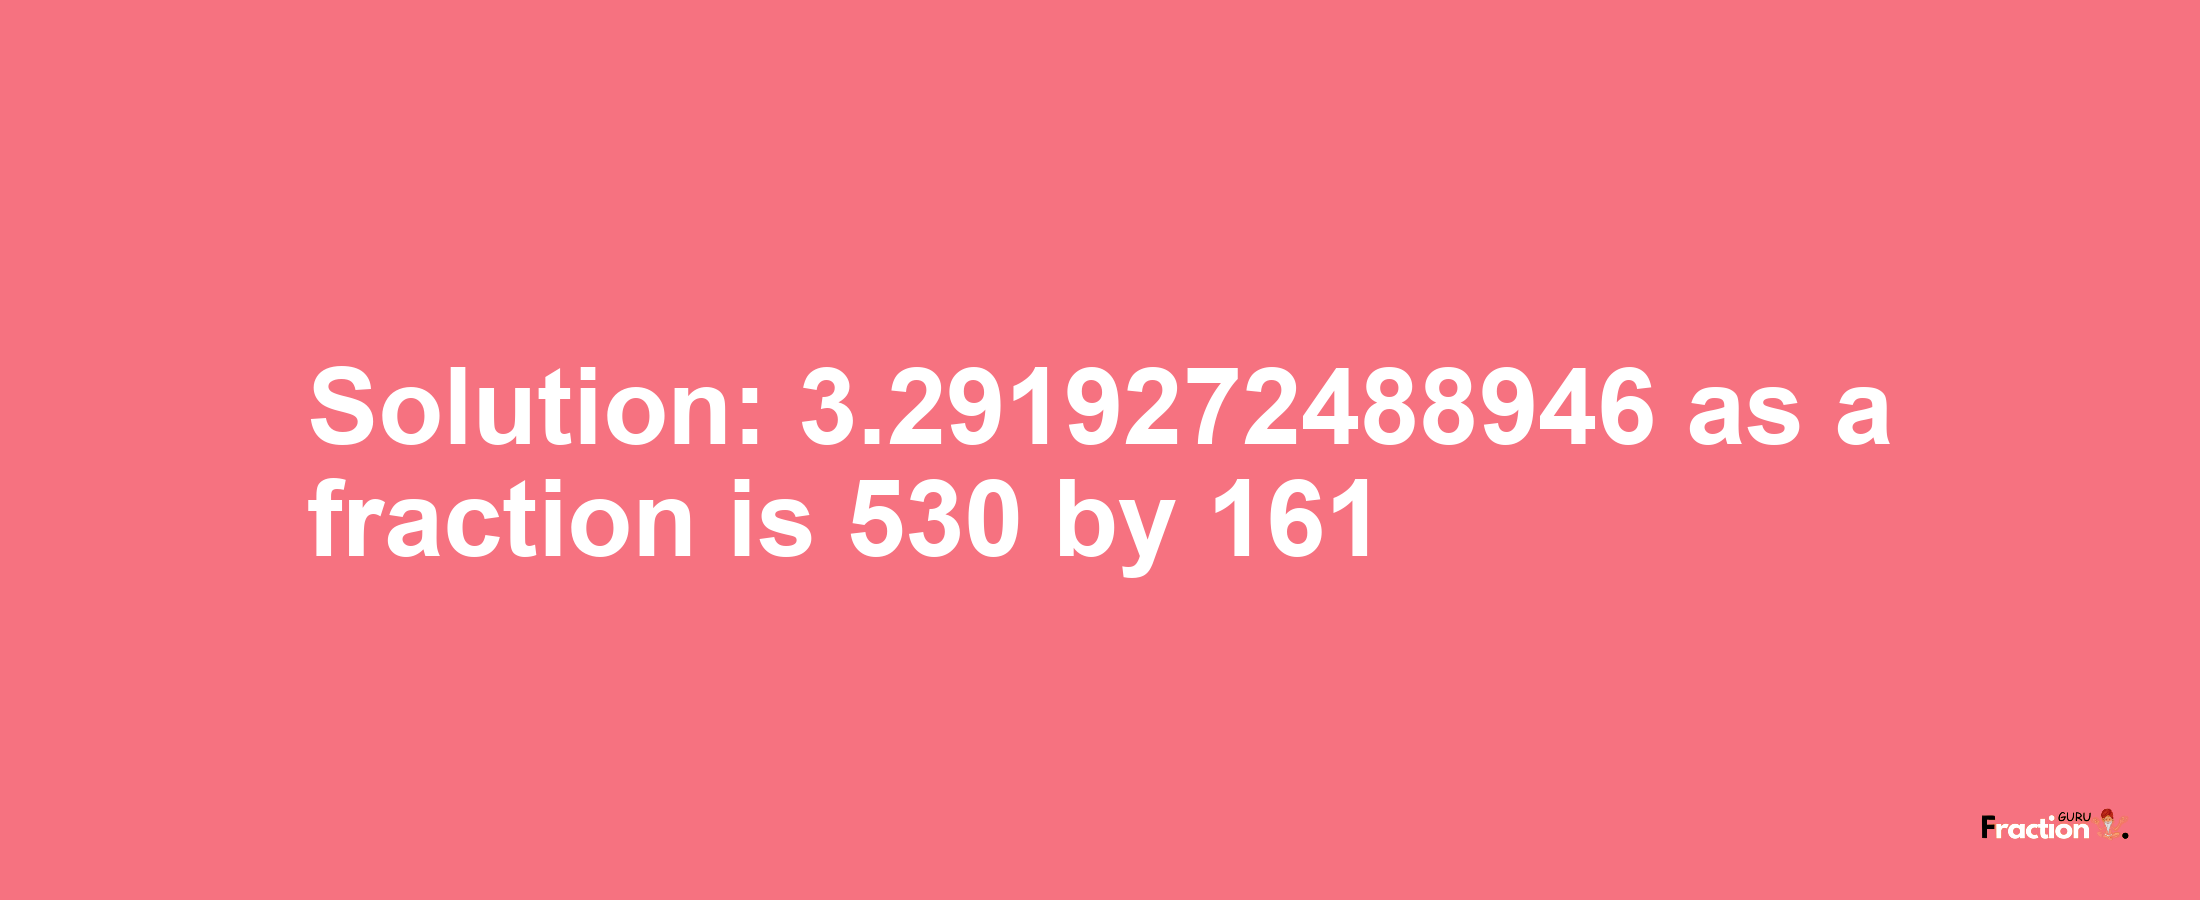 Solution:3.2919272488946 as a fraction is 530/161